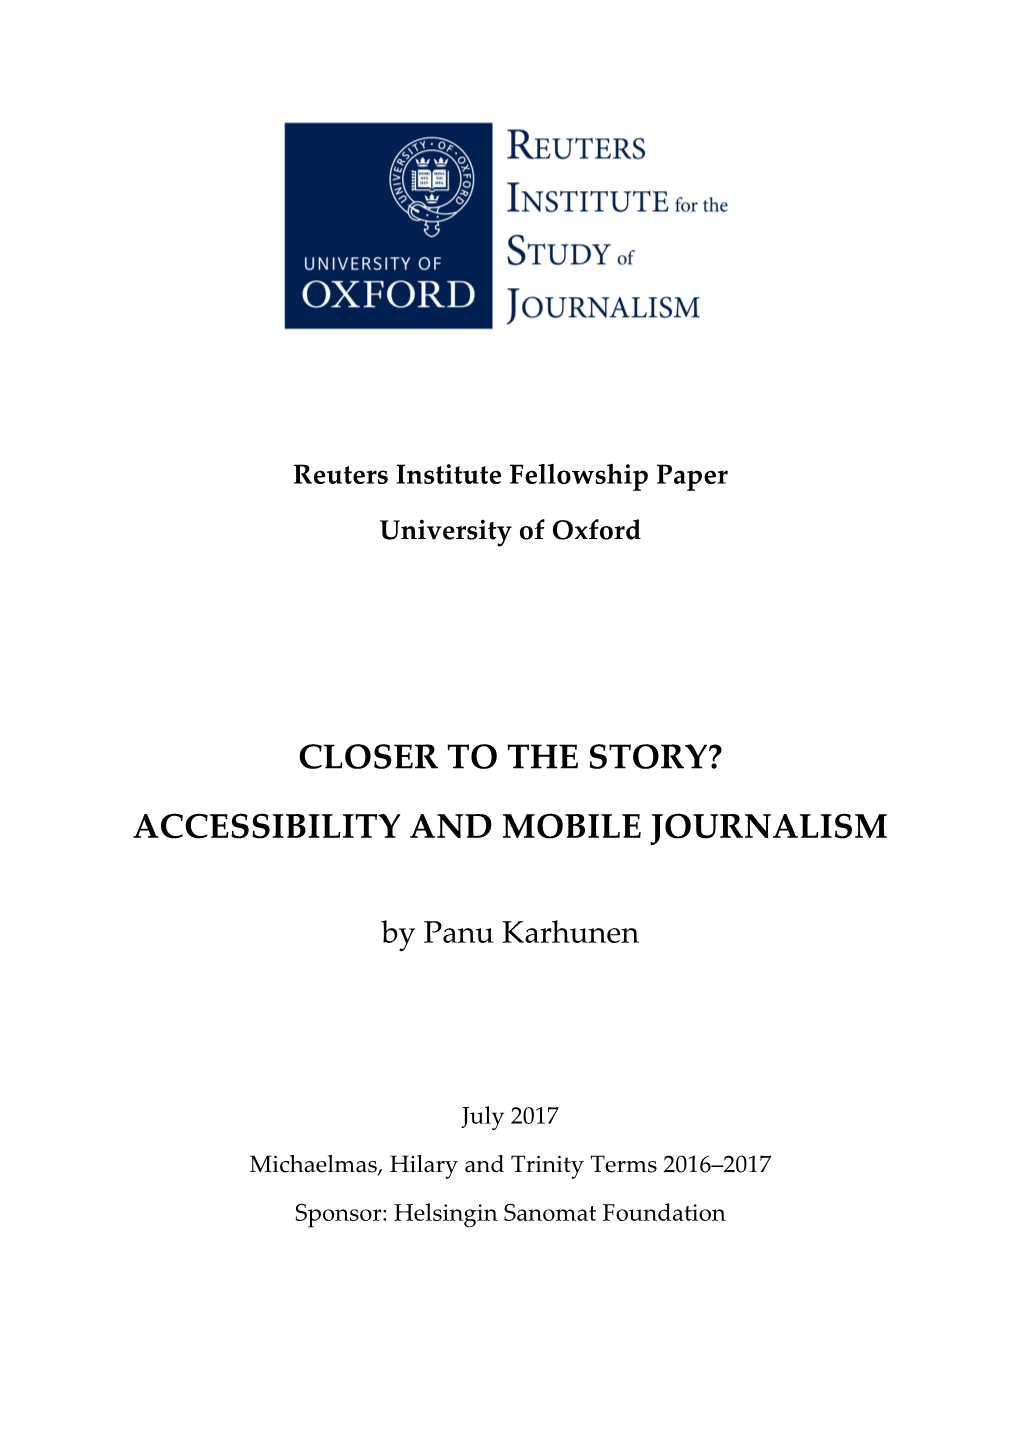 Accessibility and Mobile Journalism